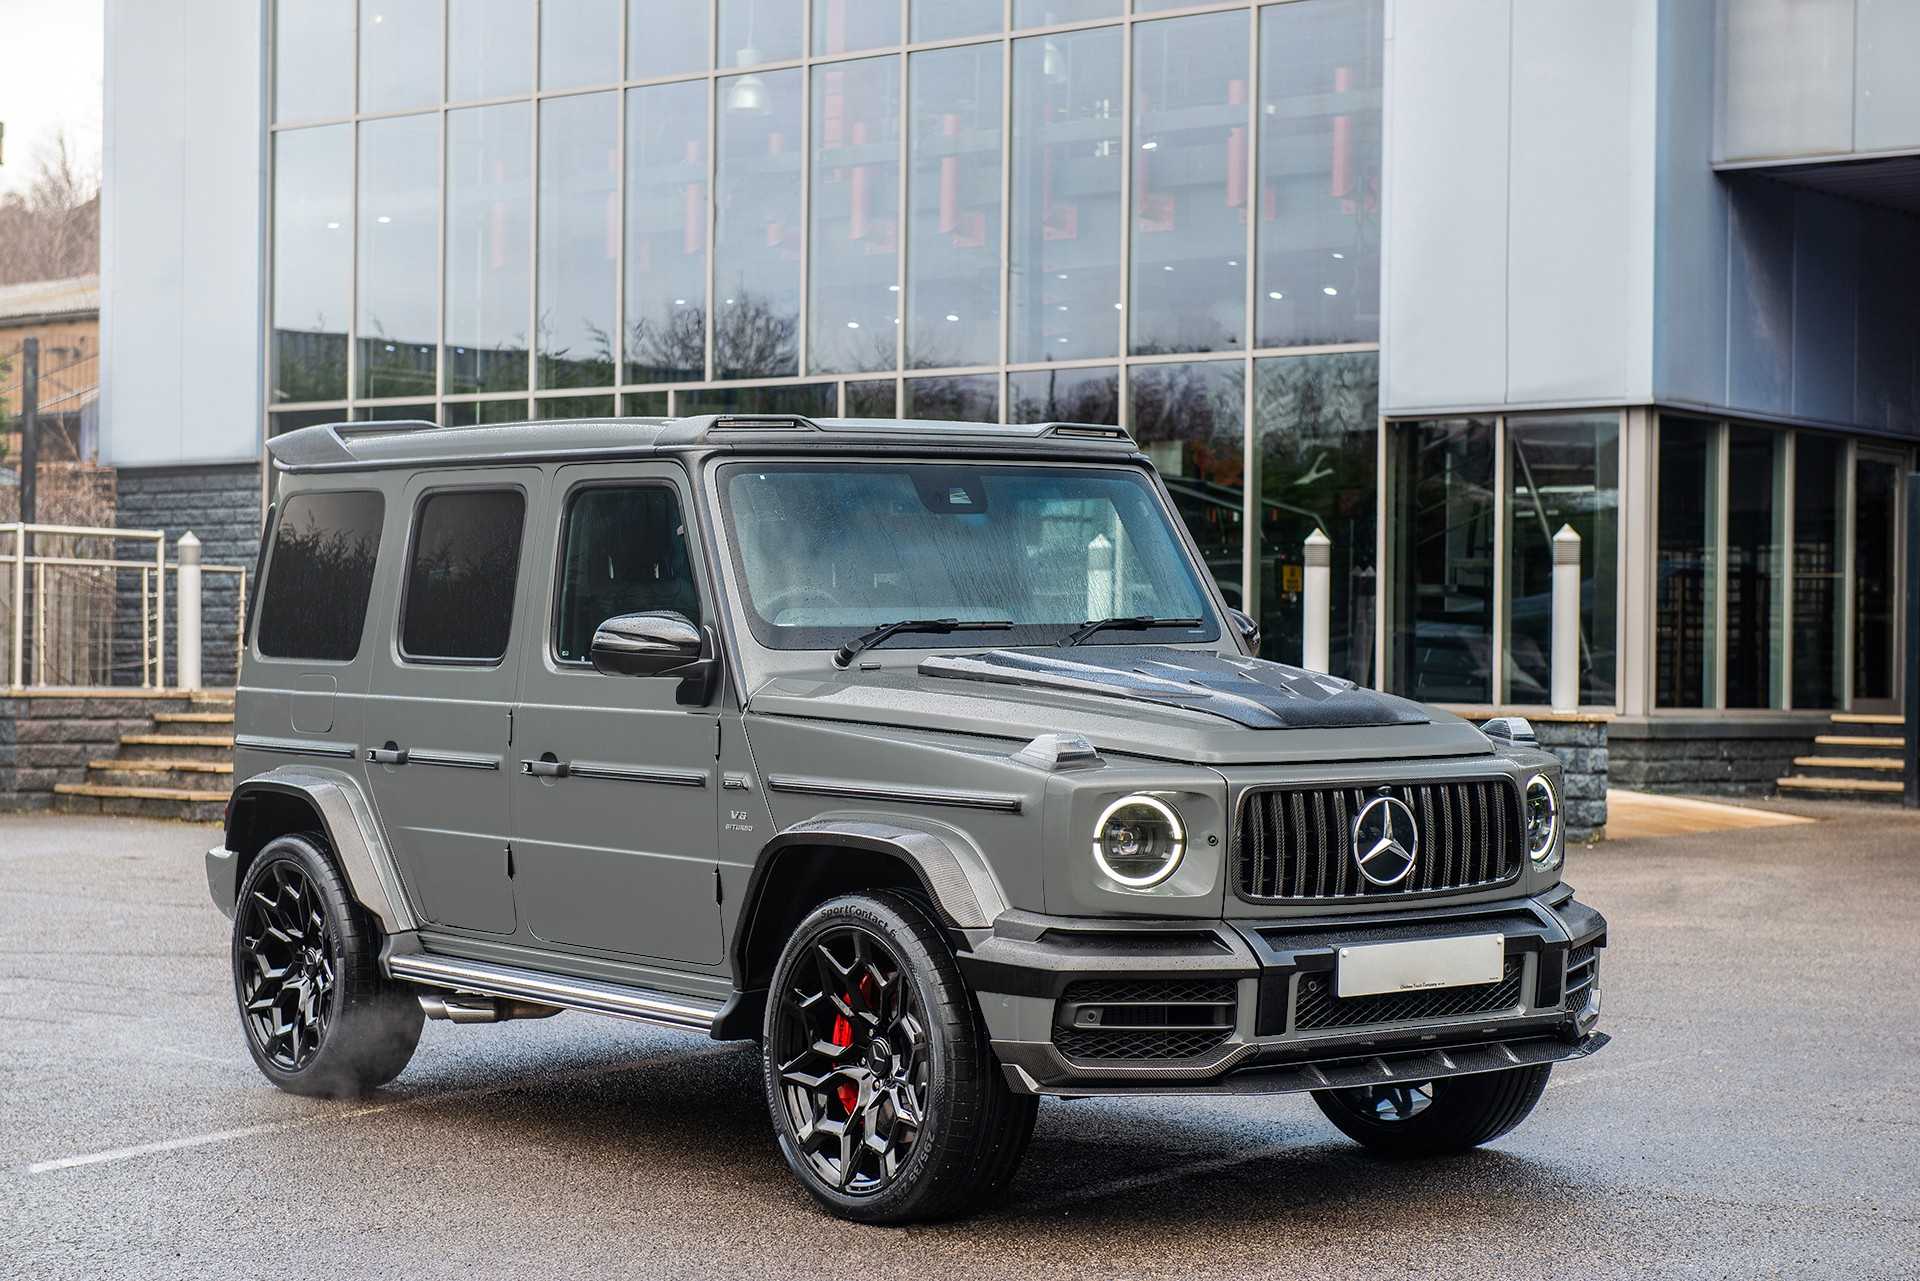 MercedesAMG G63 Gets A Carbon Wide Track Upgrade From Project Kahn